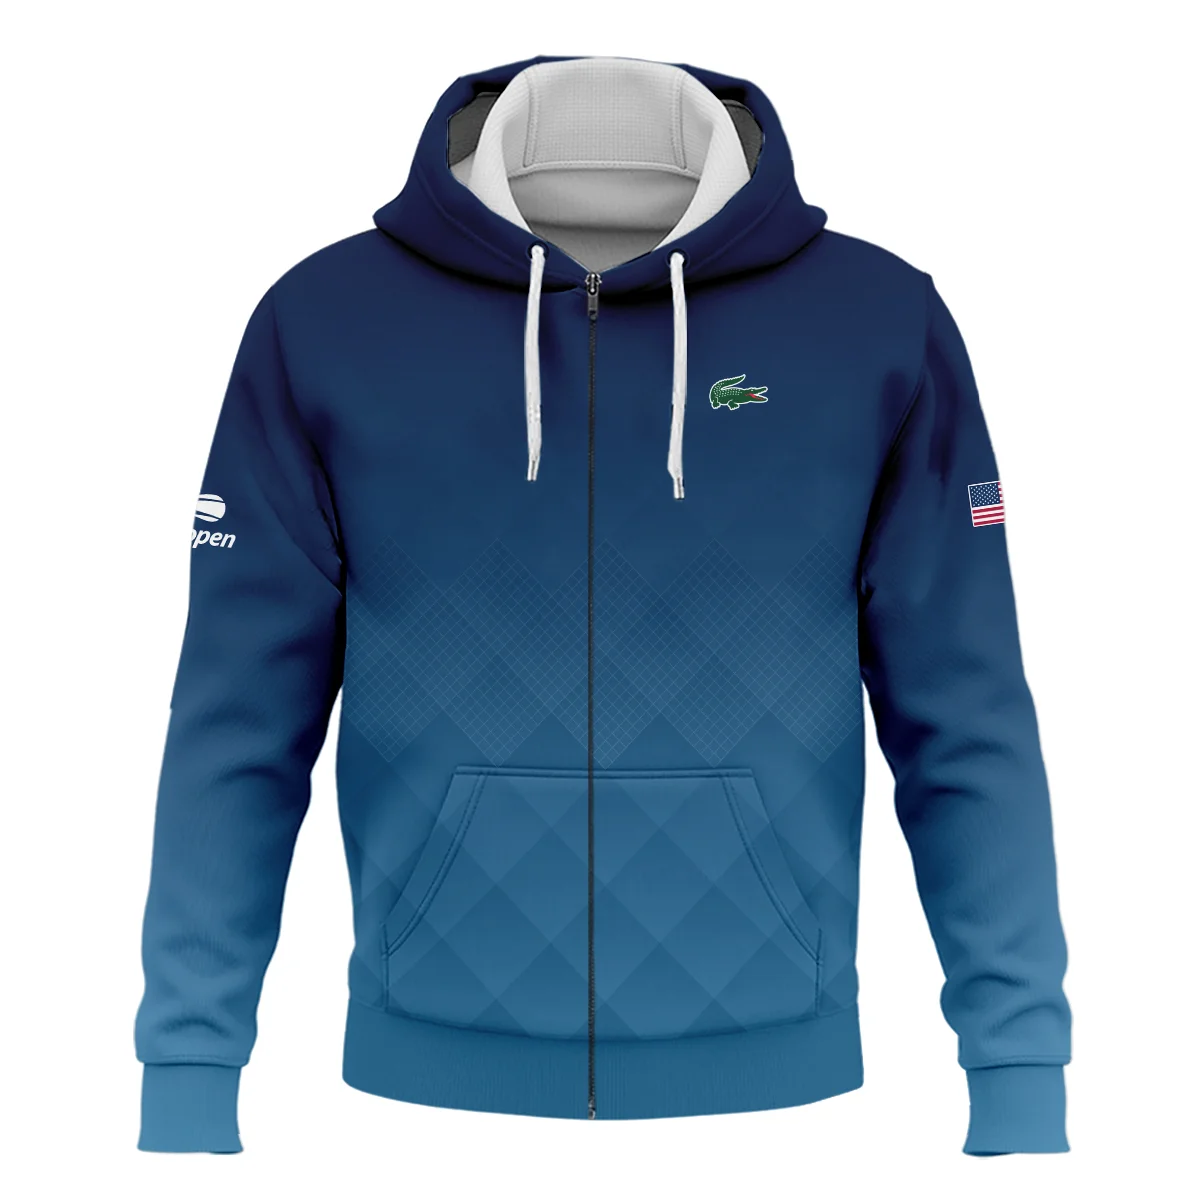 Lacoste Blue Abstract Background US Open Tennis Champions Quarter-Zip Jacket Style Classic Quarter-Zip Jacket